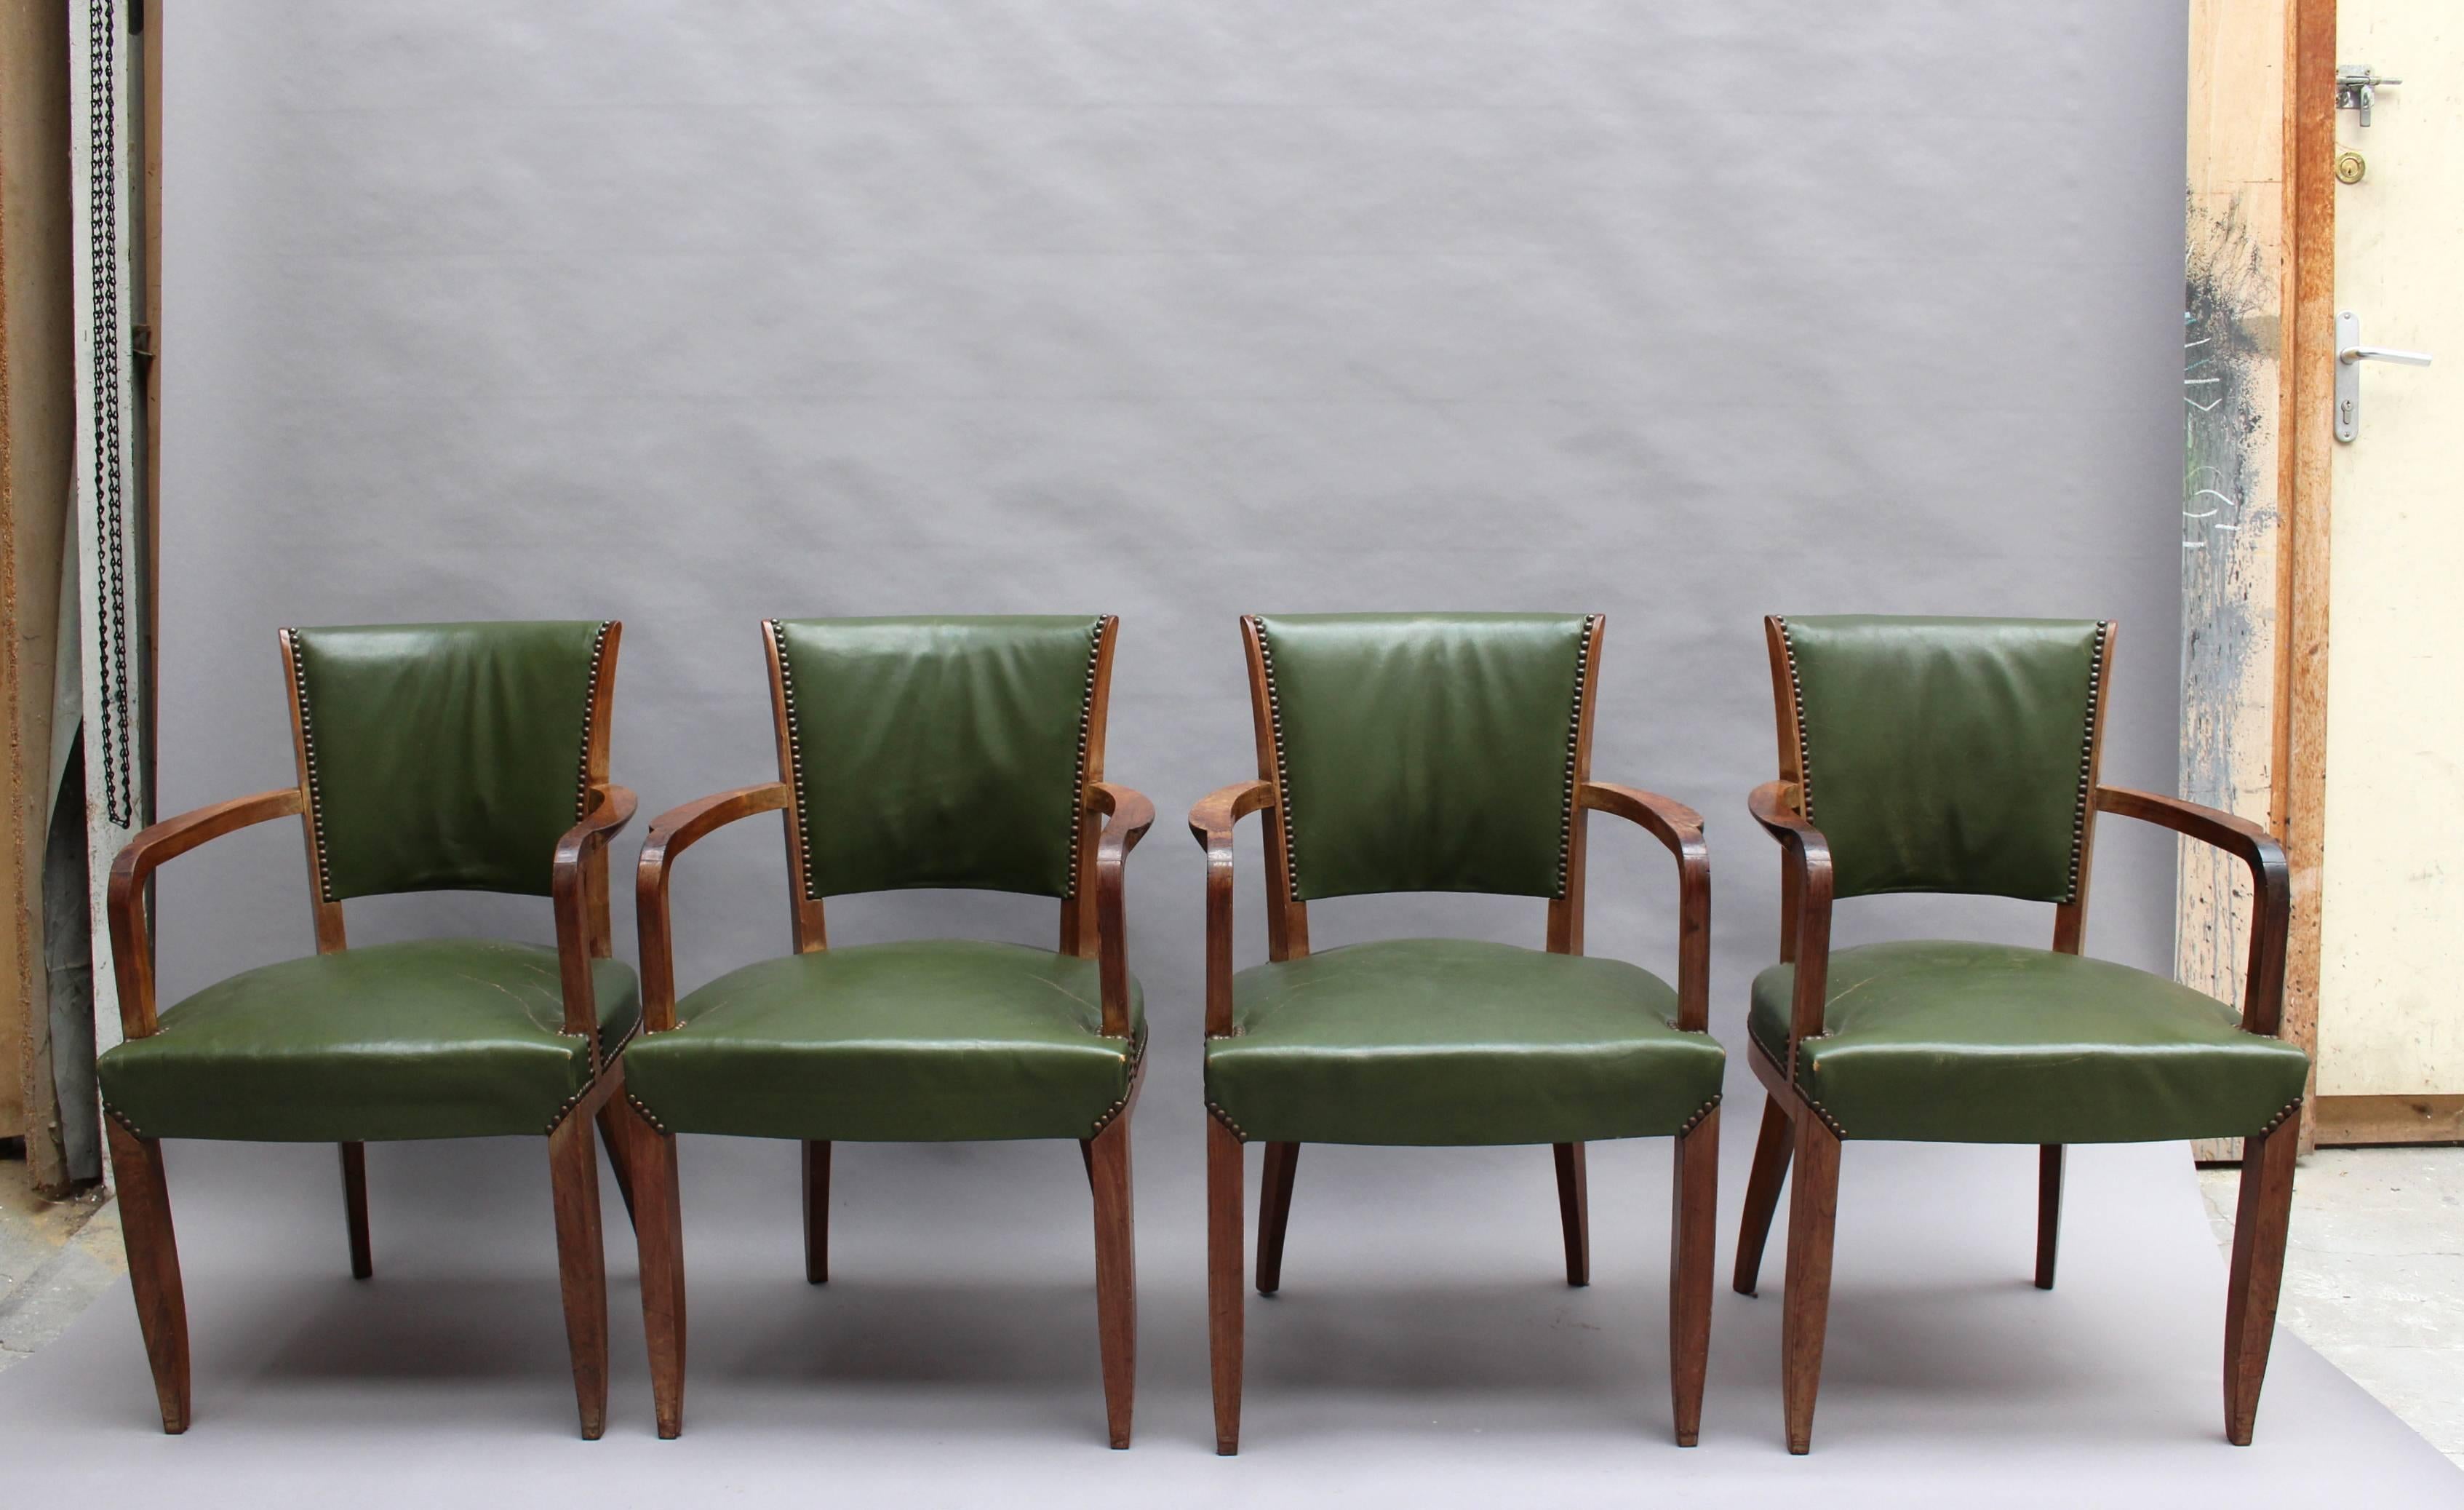 Set of 4 Fine French Art Deco Rosewood Chairs (4 matching arm chairs available) 5